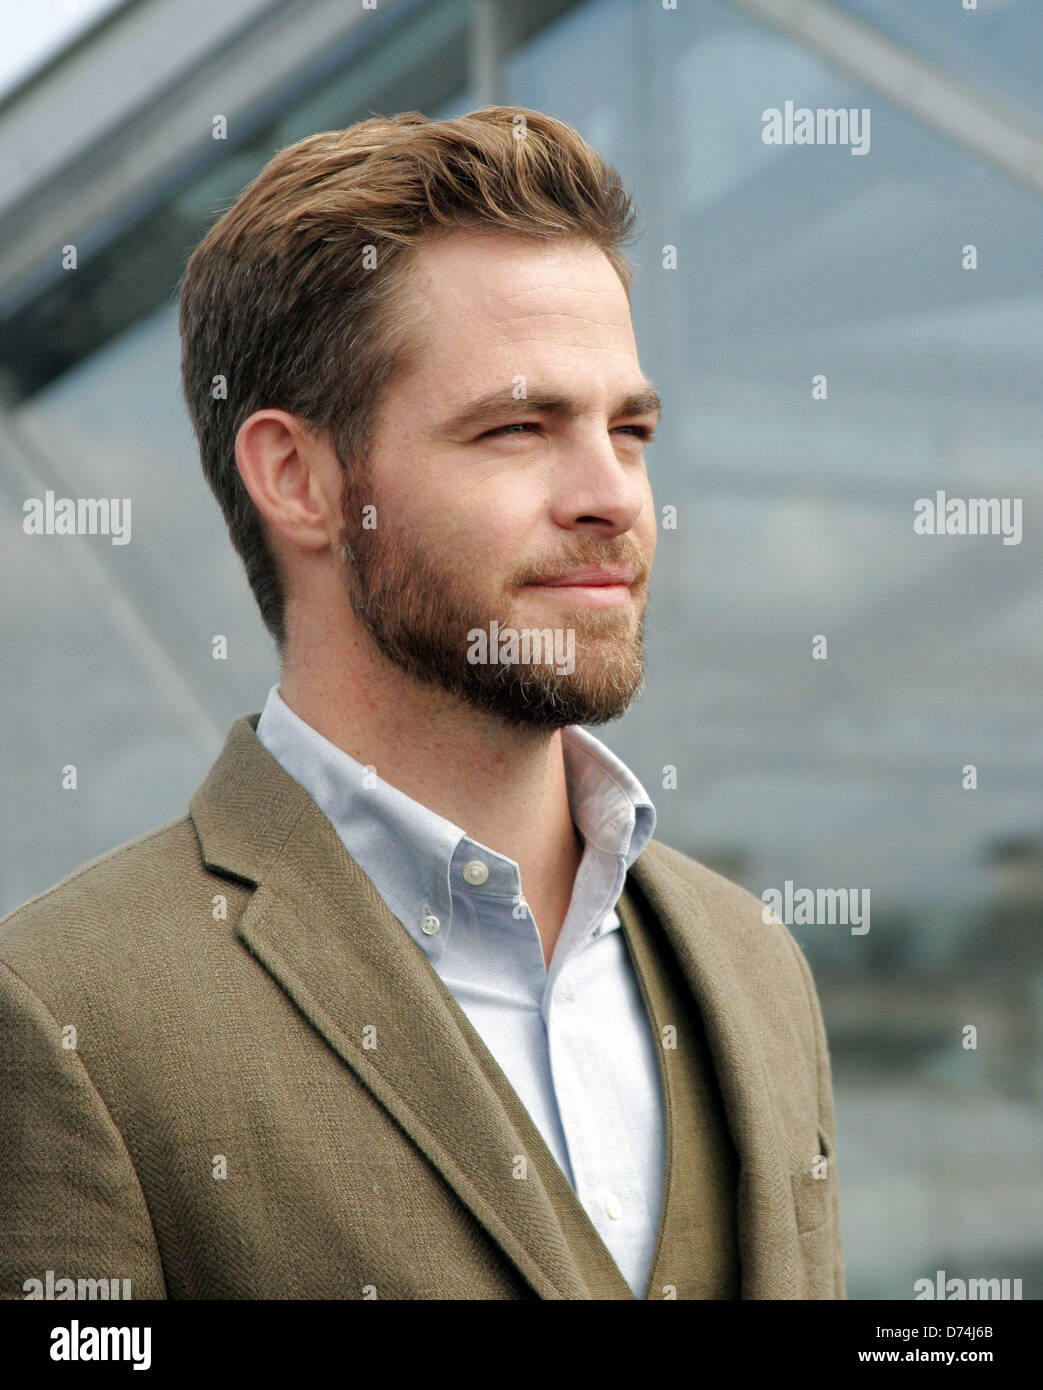 Berlin, Germany. 28th April, 2013. US actor Chris Pine poses during the presentation of the movie 'Star Trek Into Darkness' in Berlin, Germany, 28 April 2013. The film will be released in Germany on 09 May 2013. Photo: XAMAX/dpa/dpa/Alamy Live News Stock Photo